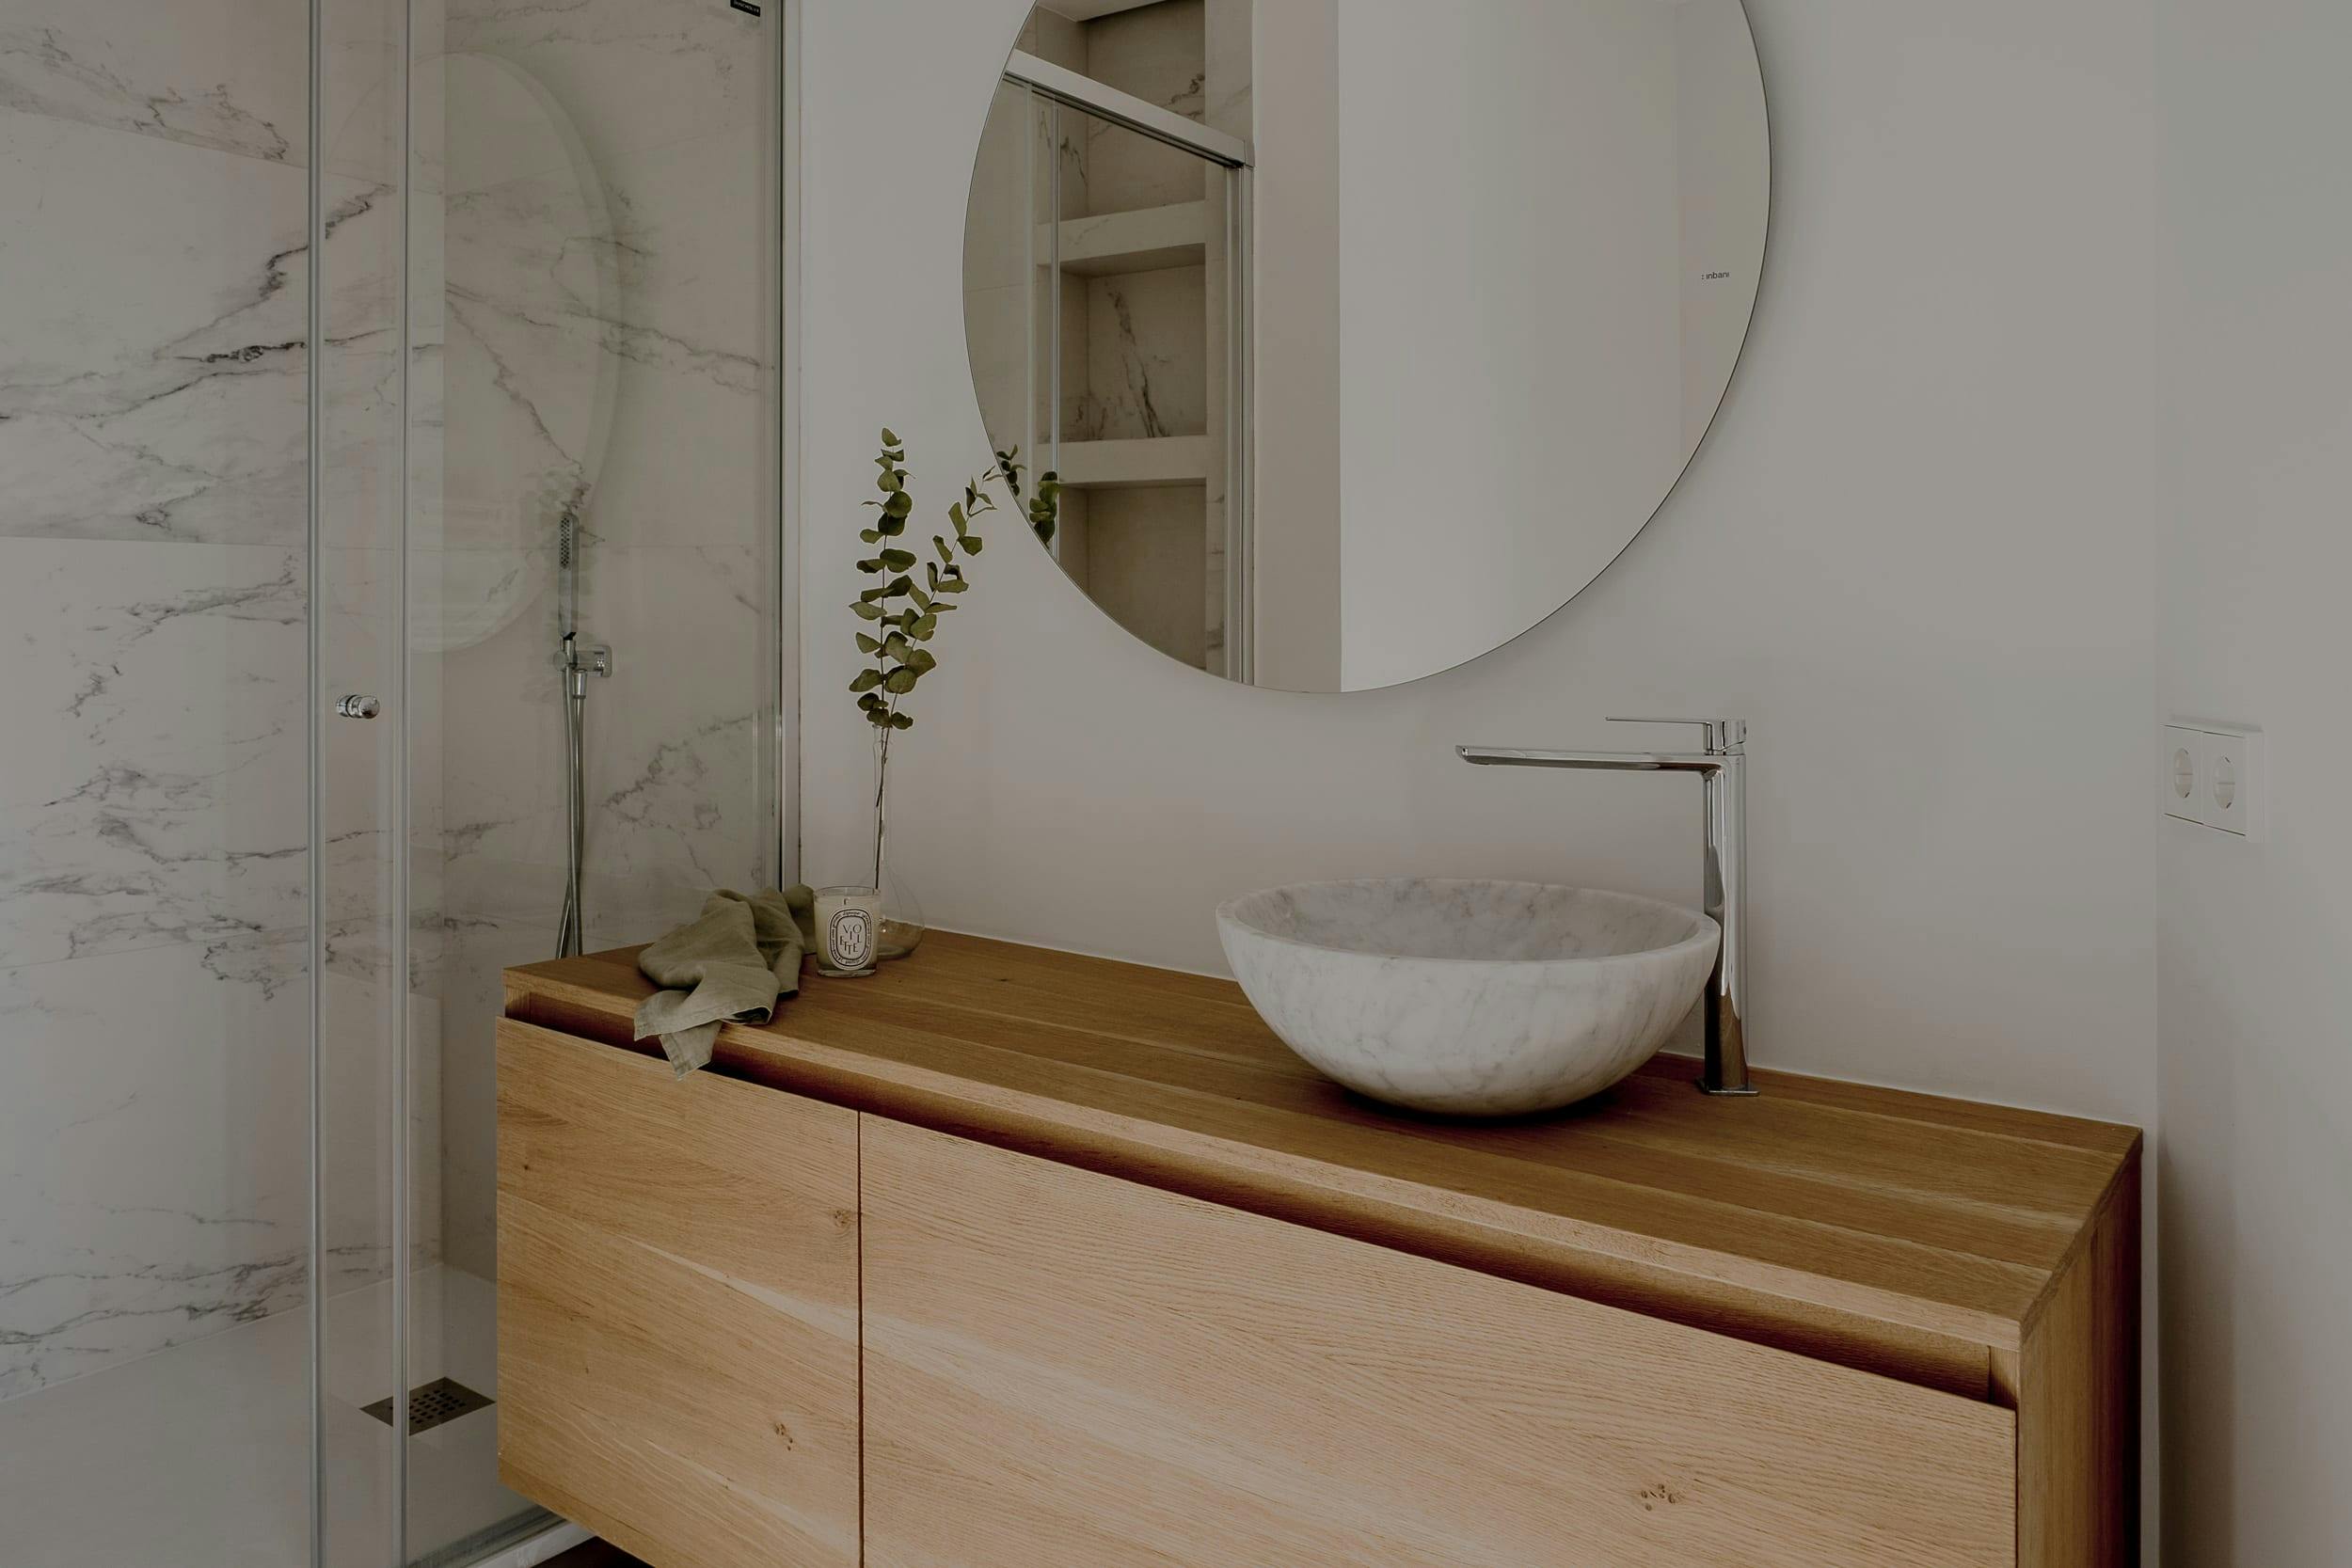 The image features a modern bathroom with a white sink, a large mirror, and a wooden vanity.